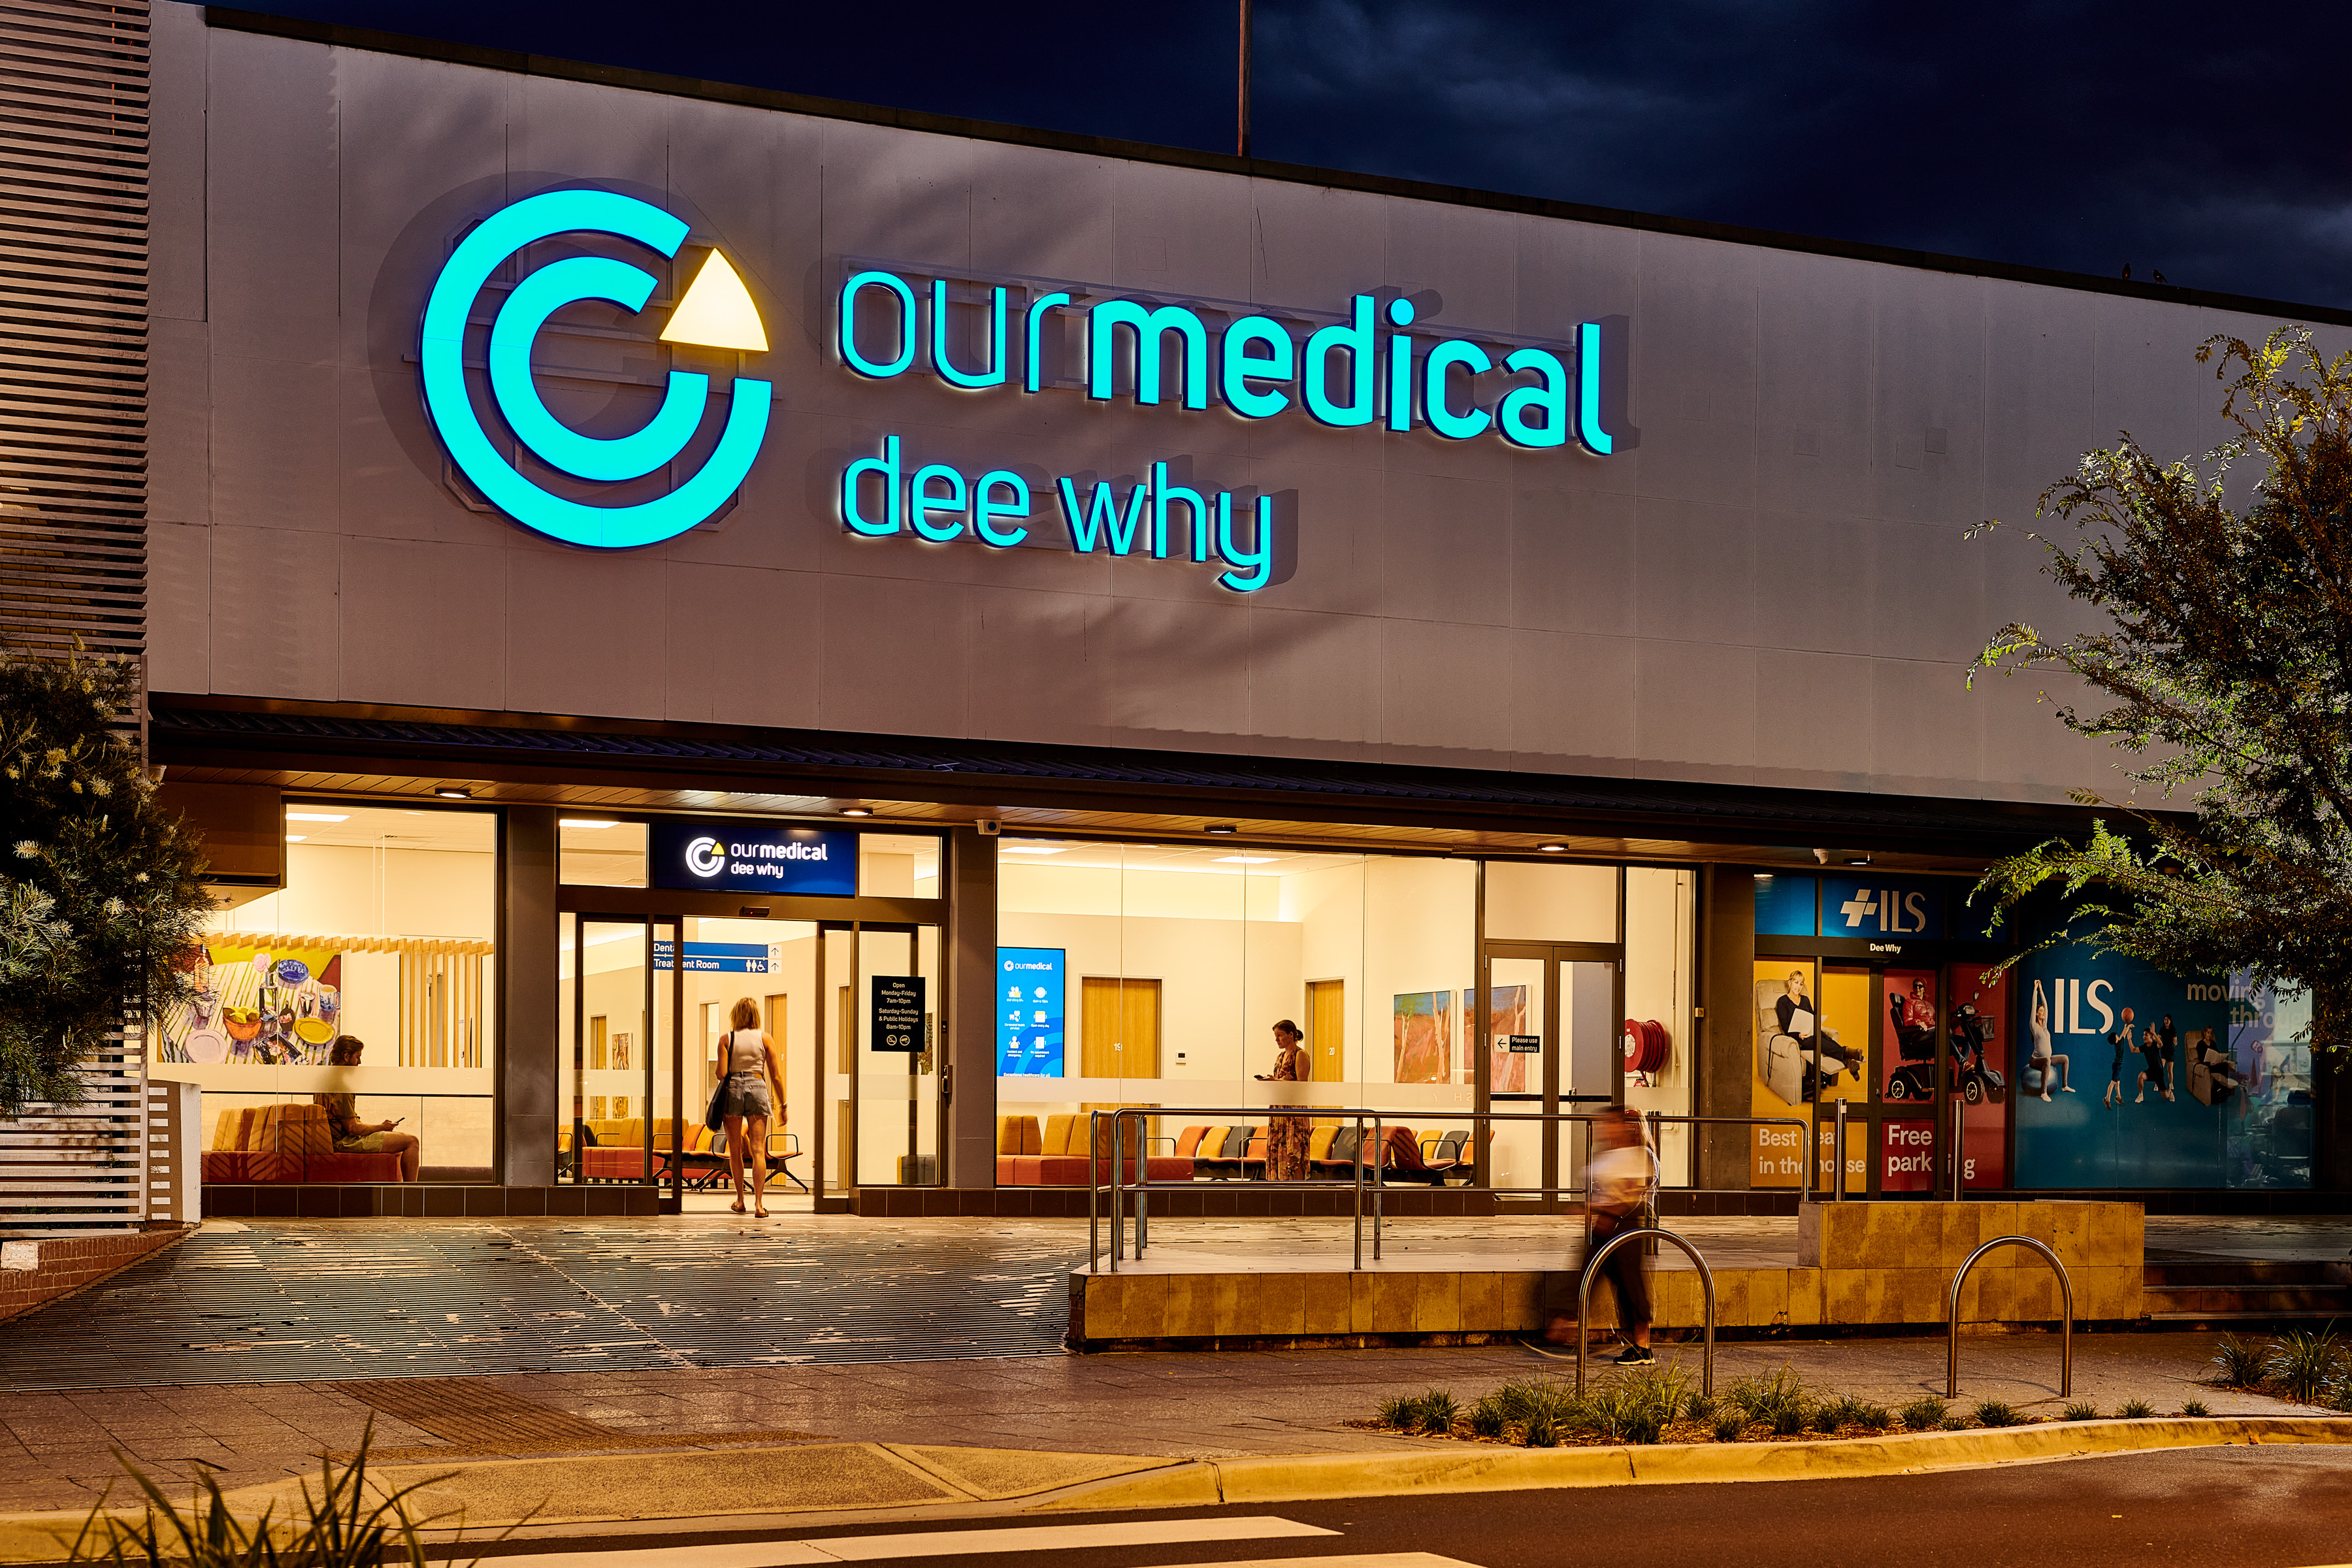 Our Medical Dee Why 